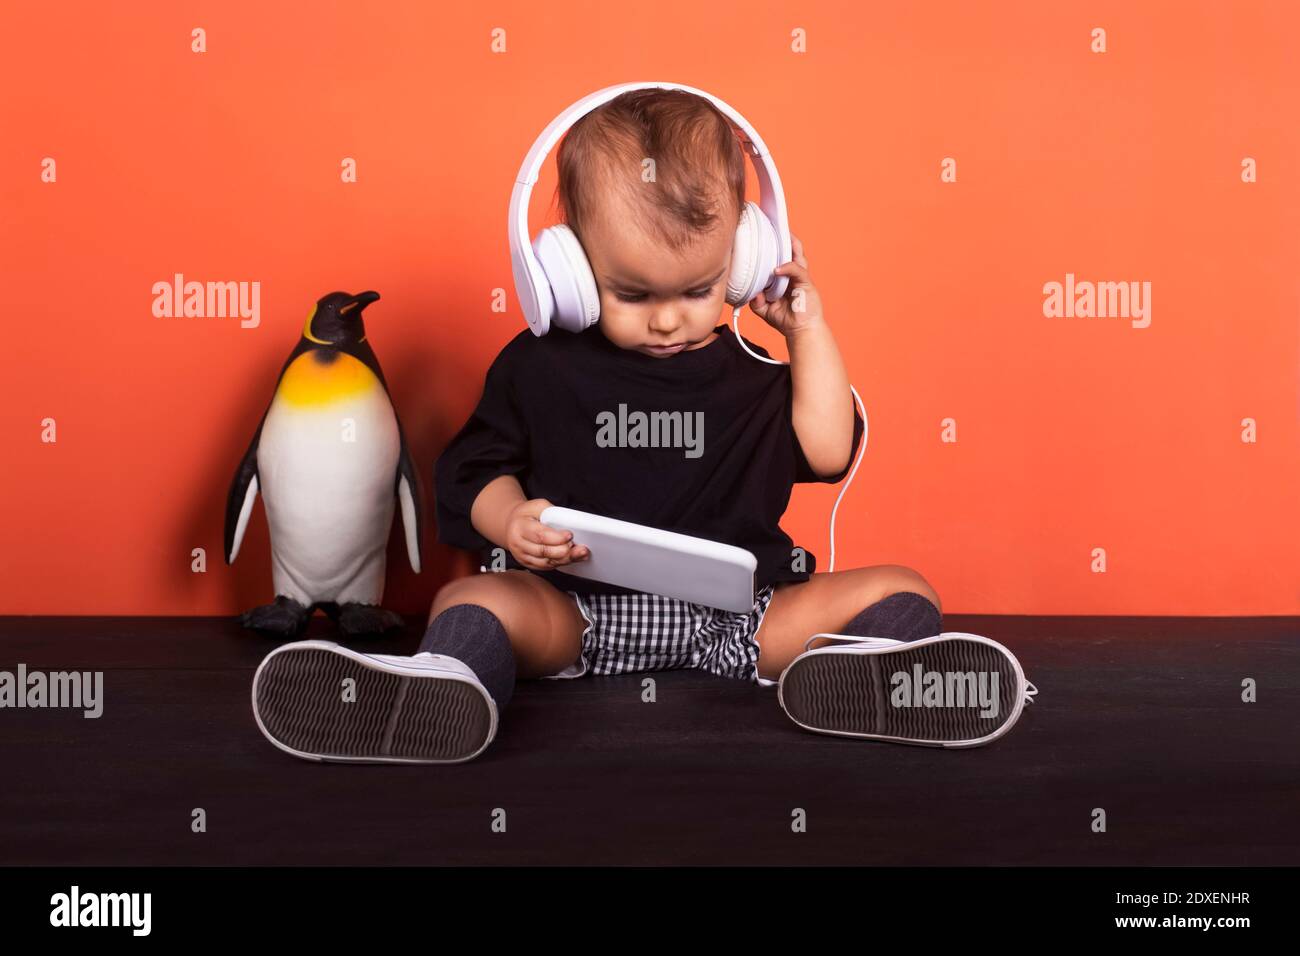 Baby girl wearing headphones using mobile phone while sitting by toy penguin against orange background Stock Photo